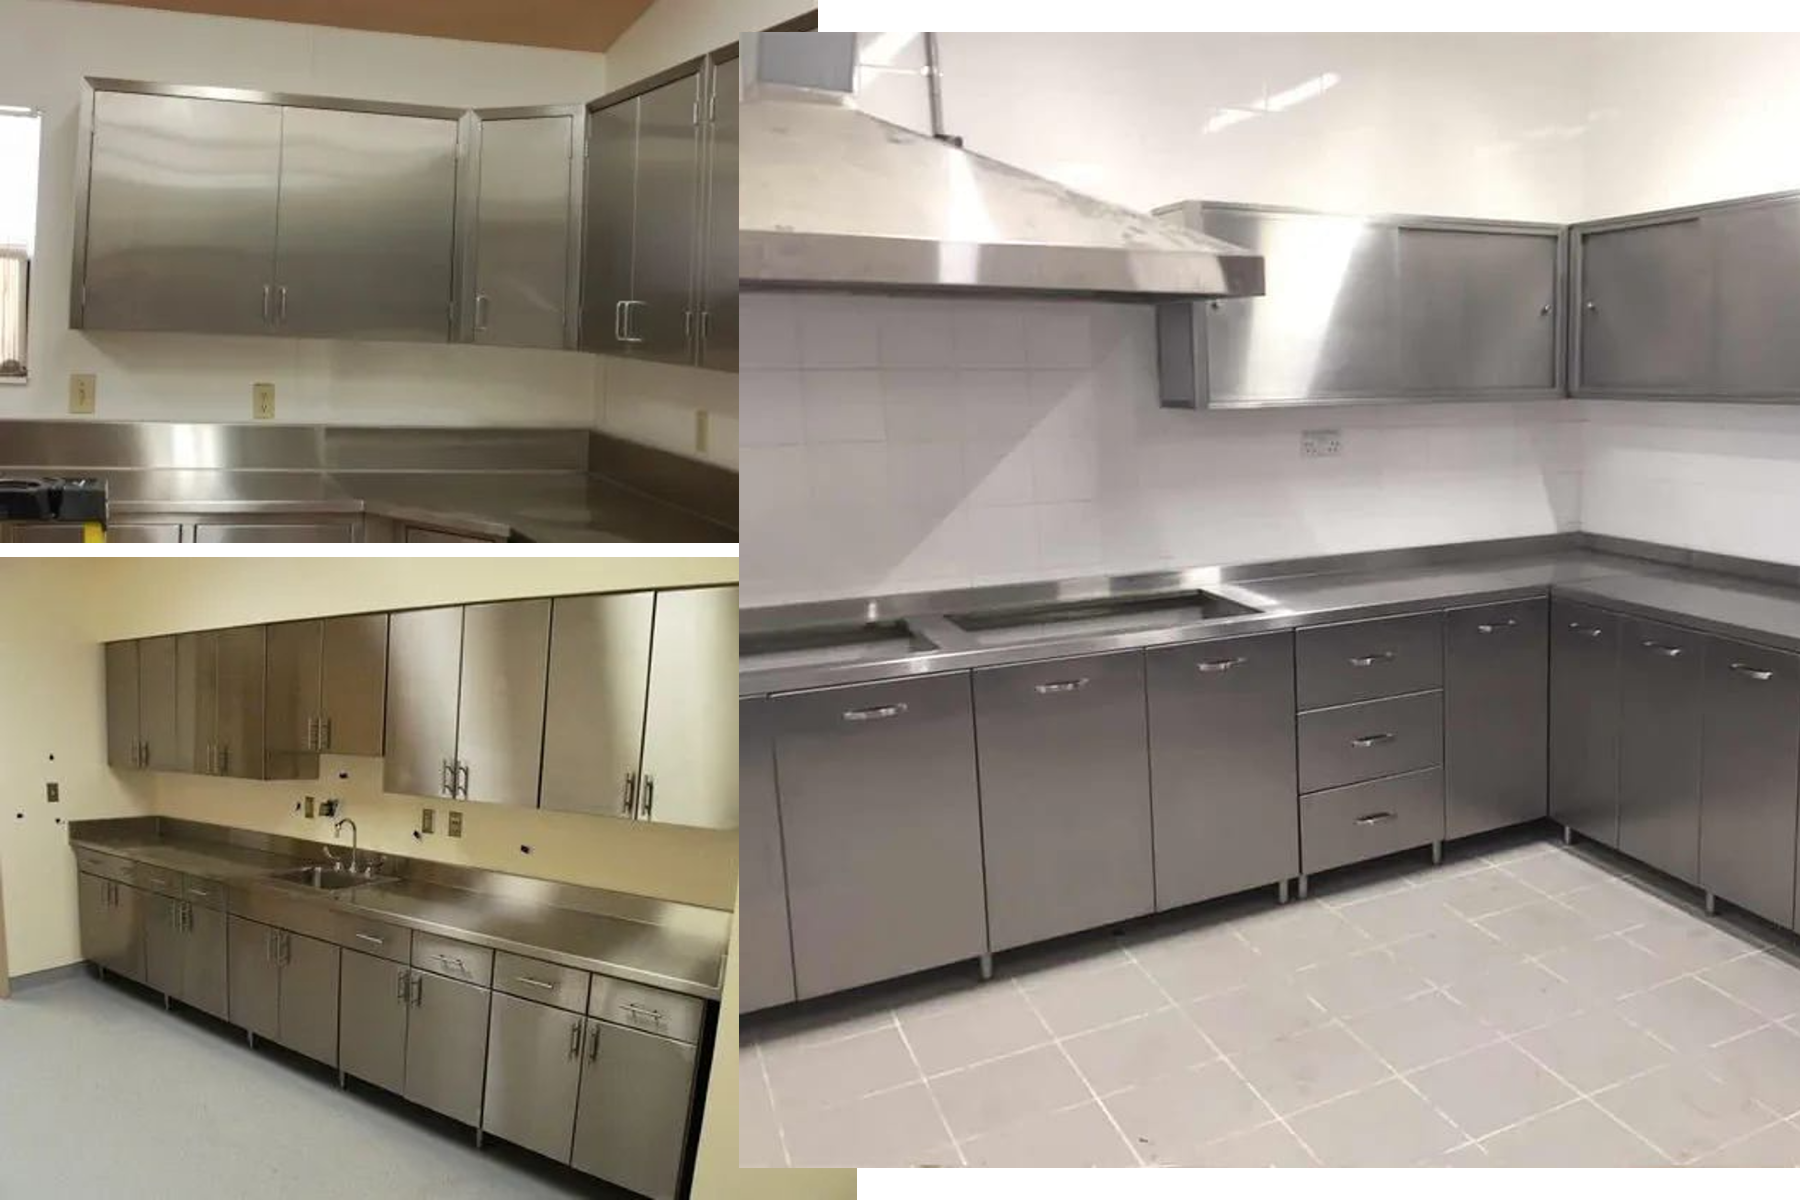 Stainless steel wall cabinets, bass cabinets